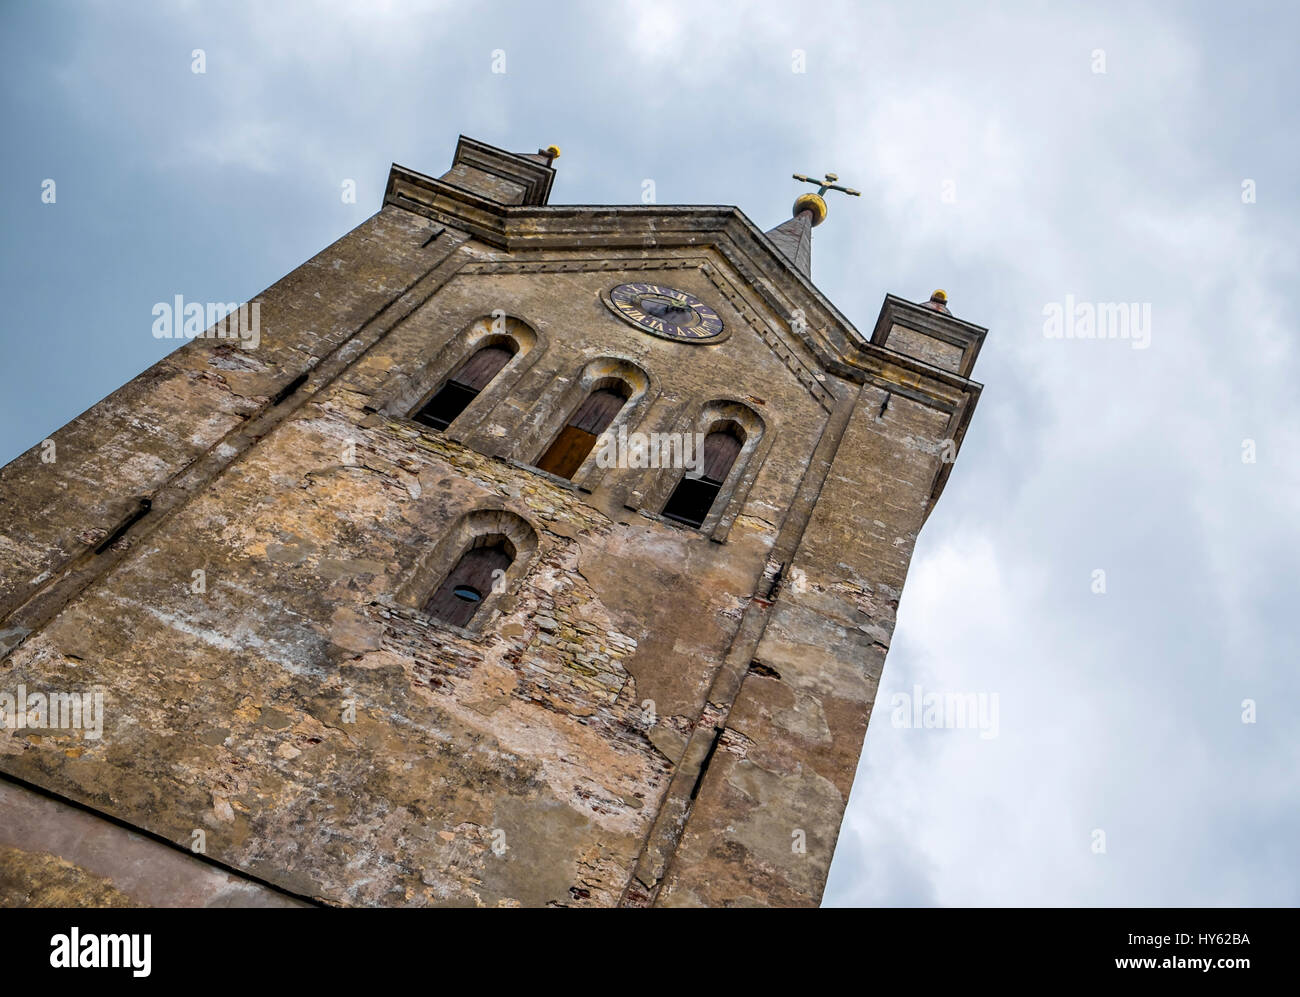 LATVIA, CESIS - CIRCA JUNE 2014: View of tower of the St. John's Church in Cesis in Latvia. Stock Photo